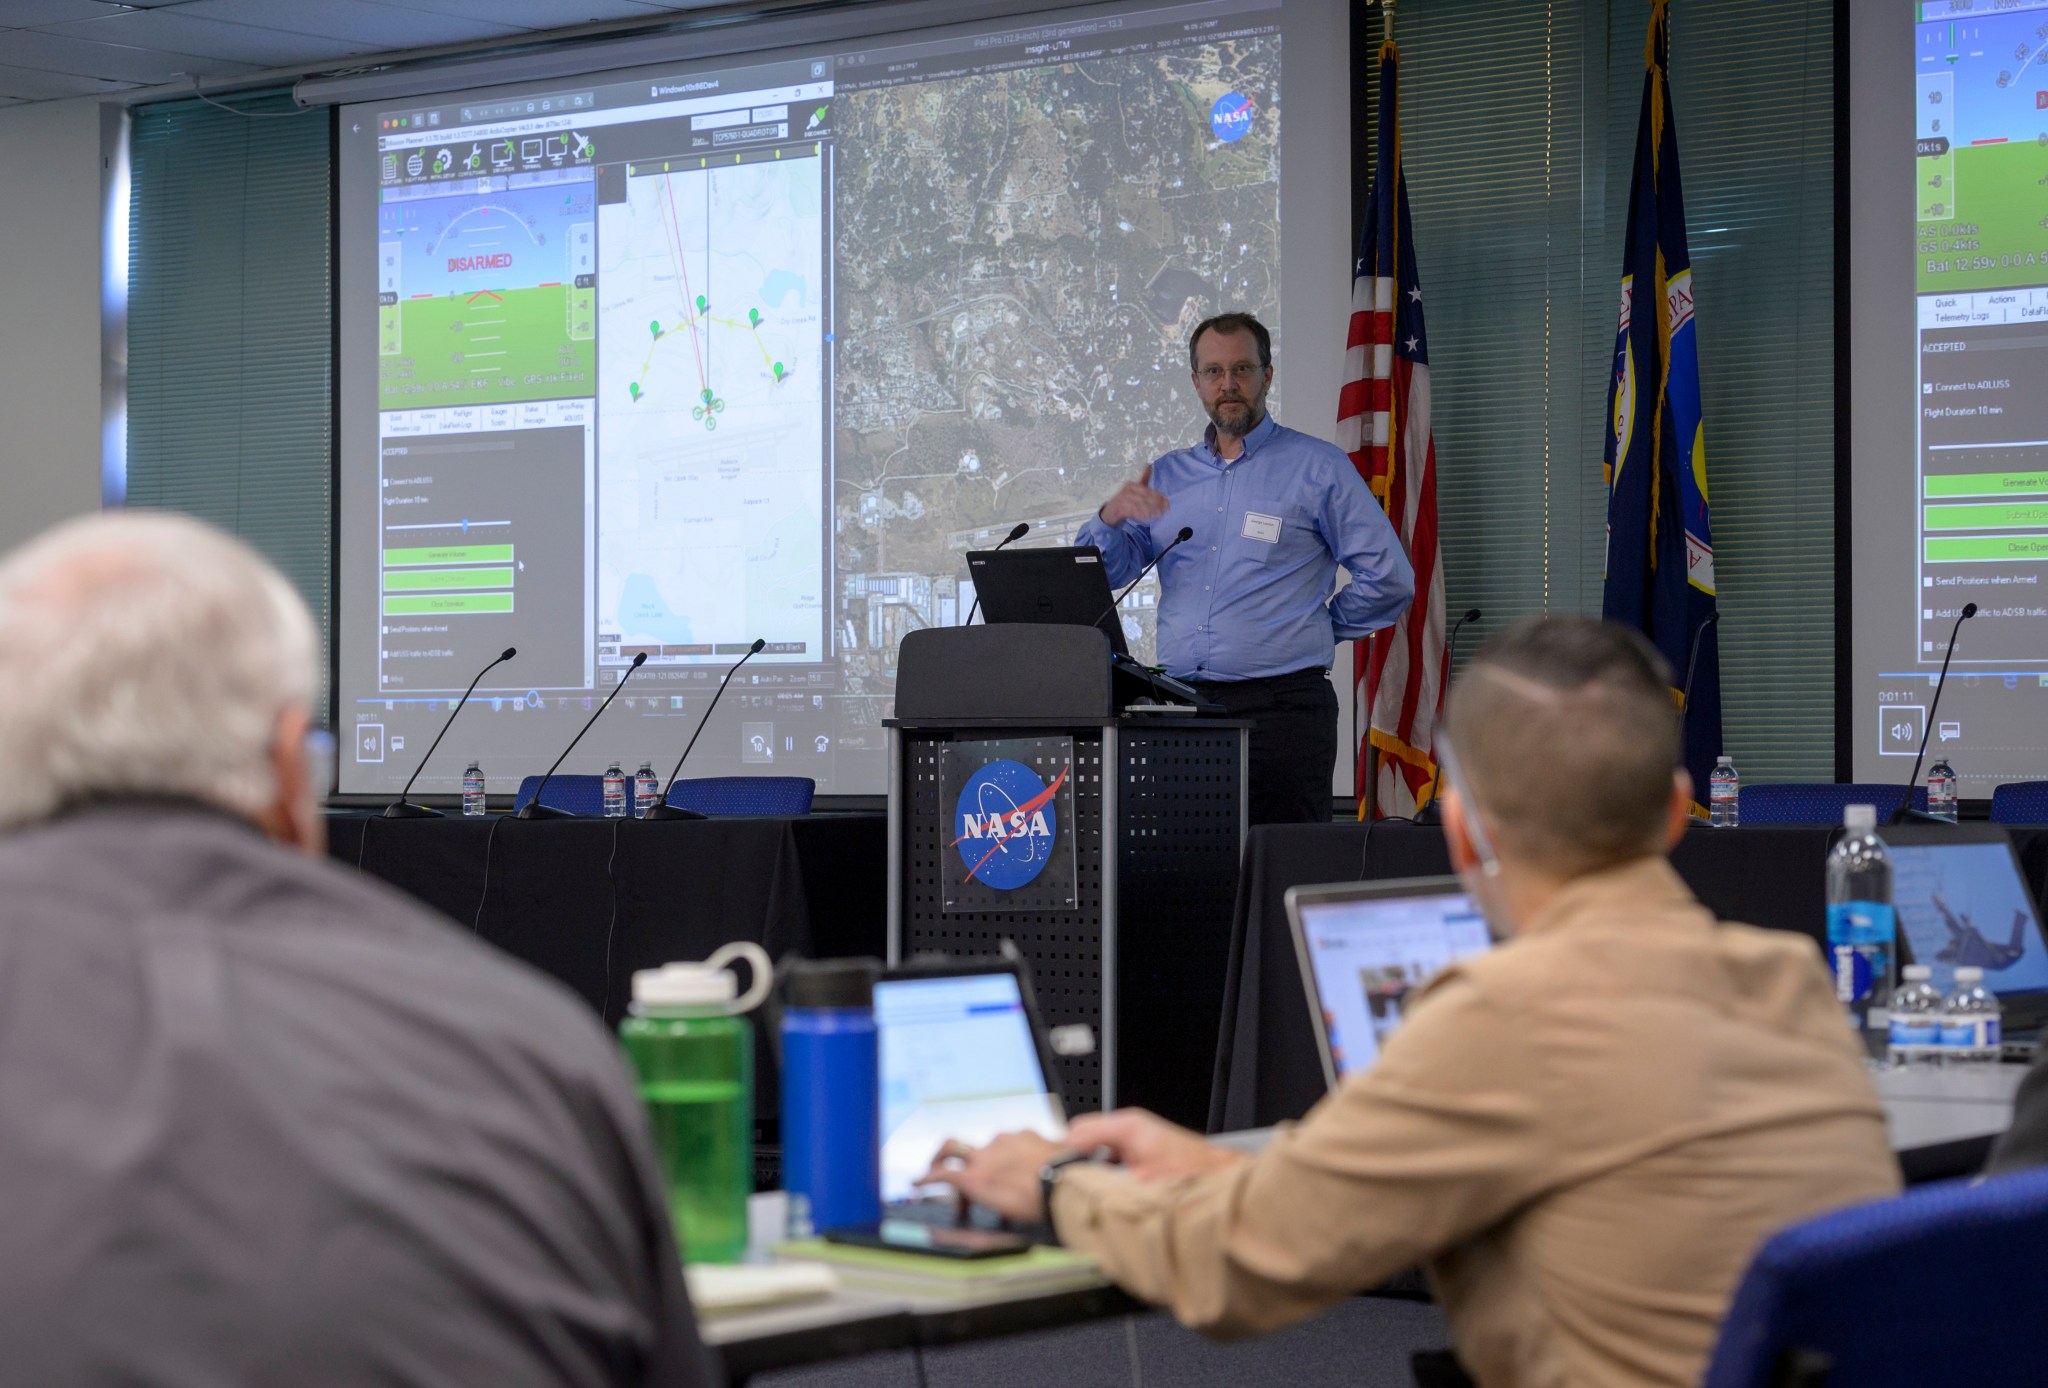 A man speaks in front of a large screen showing flight-planning and drone traffic management software.